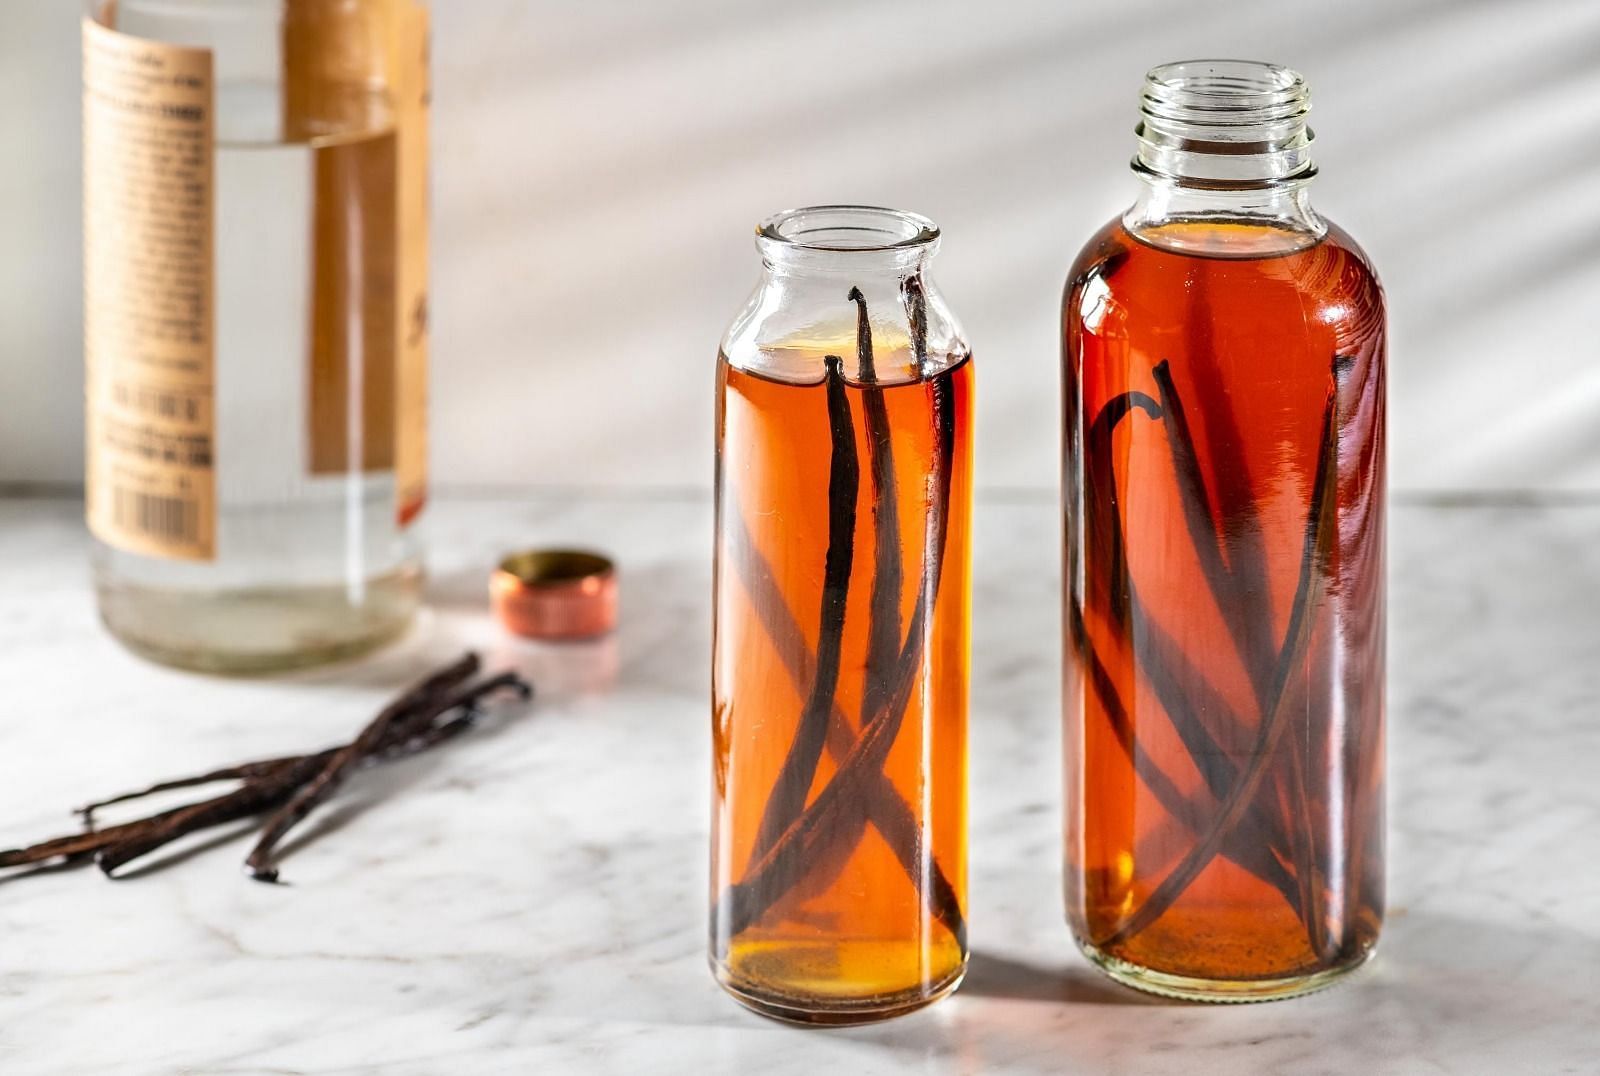 Vanilla-Extract (Image via Getty Images)